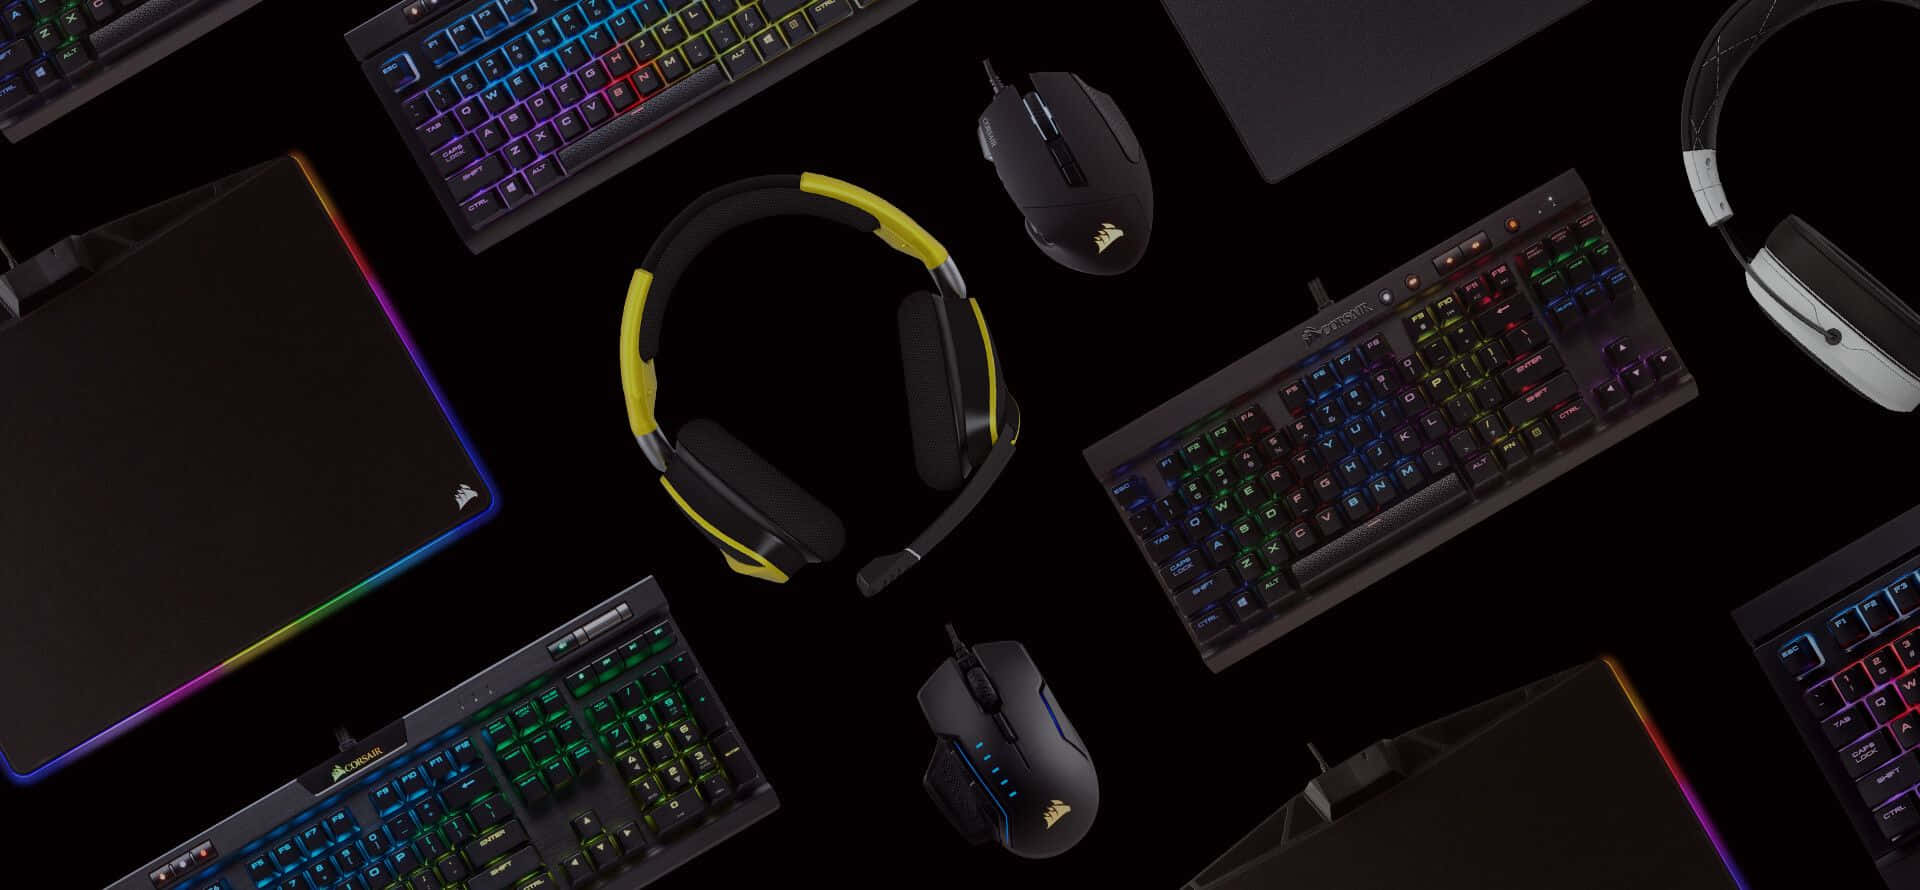 Step Up Your Game with Corsair's Innovative Gaming Products